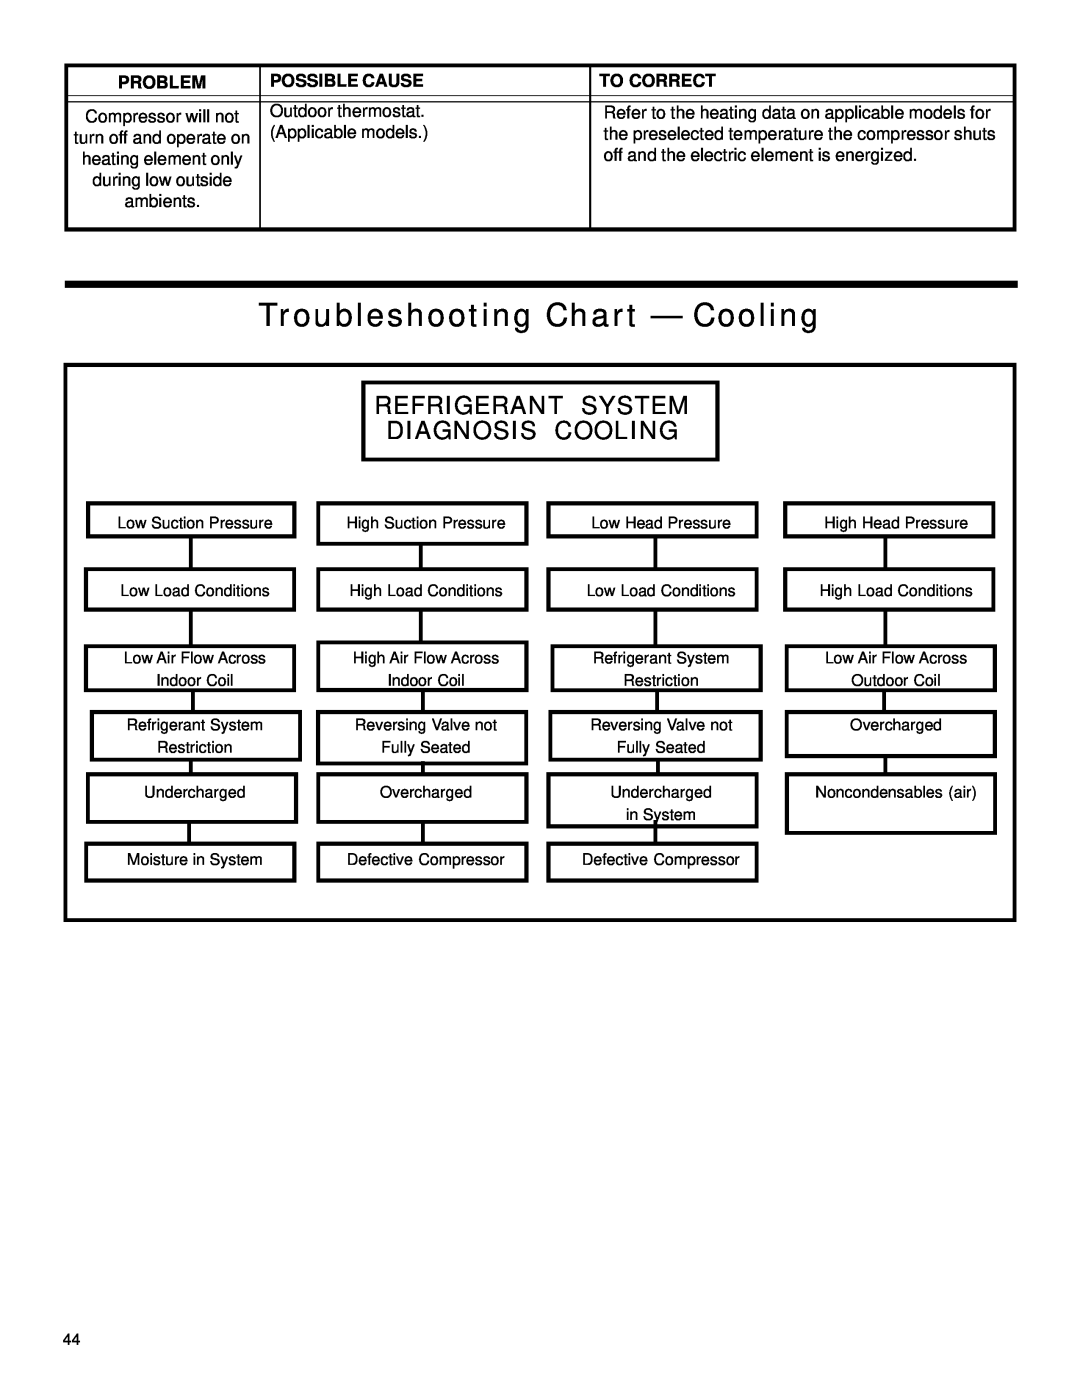 Friedrich racservmn Troubleshooting Chart — Cooling, Refrigerant System Diagnosis Cooling, Problem, Possible Cause 